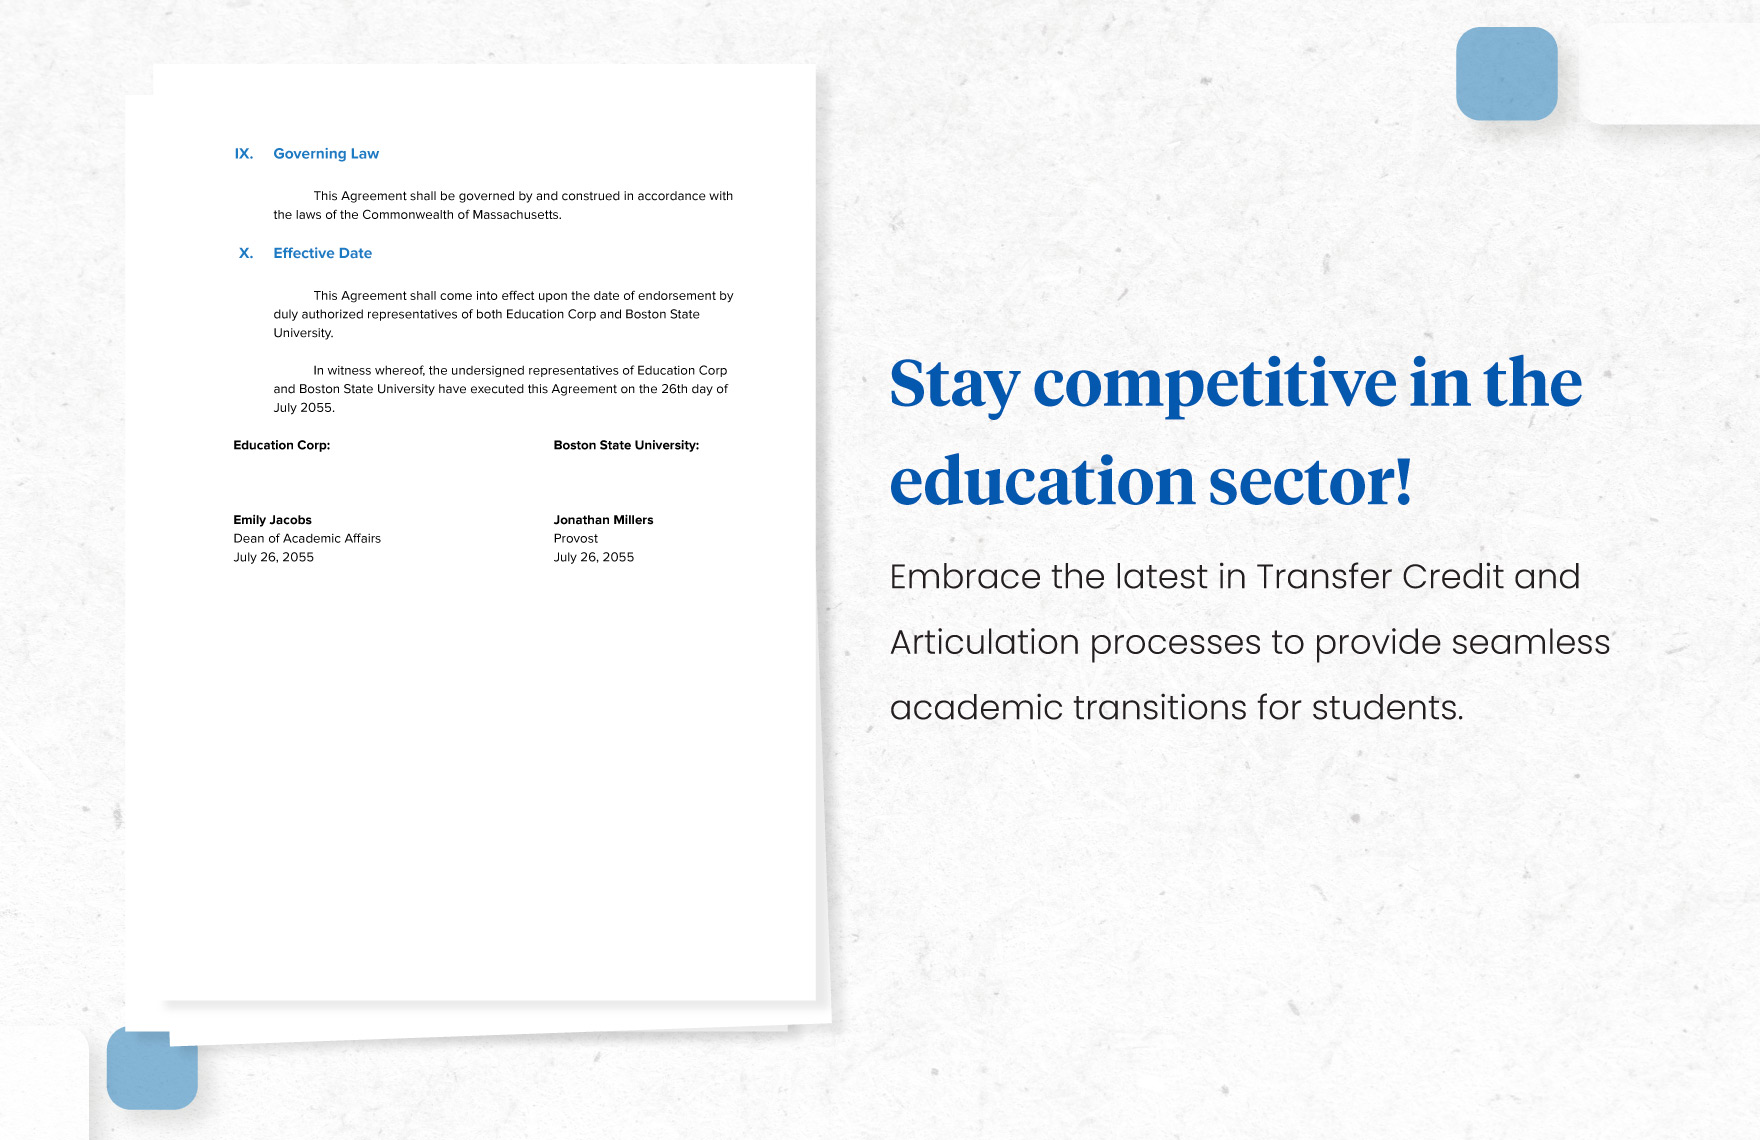 Course Articulation Agreement Template